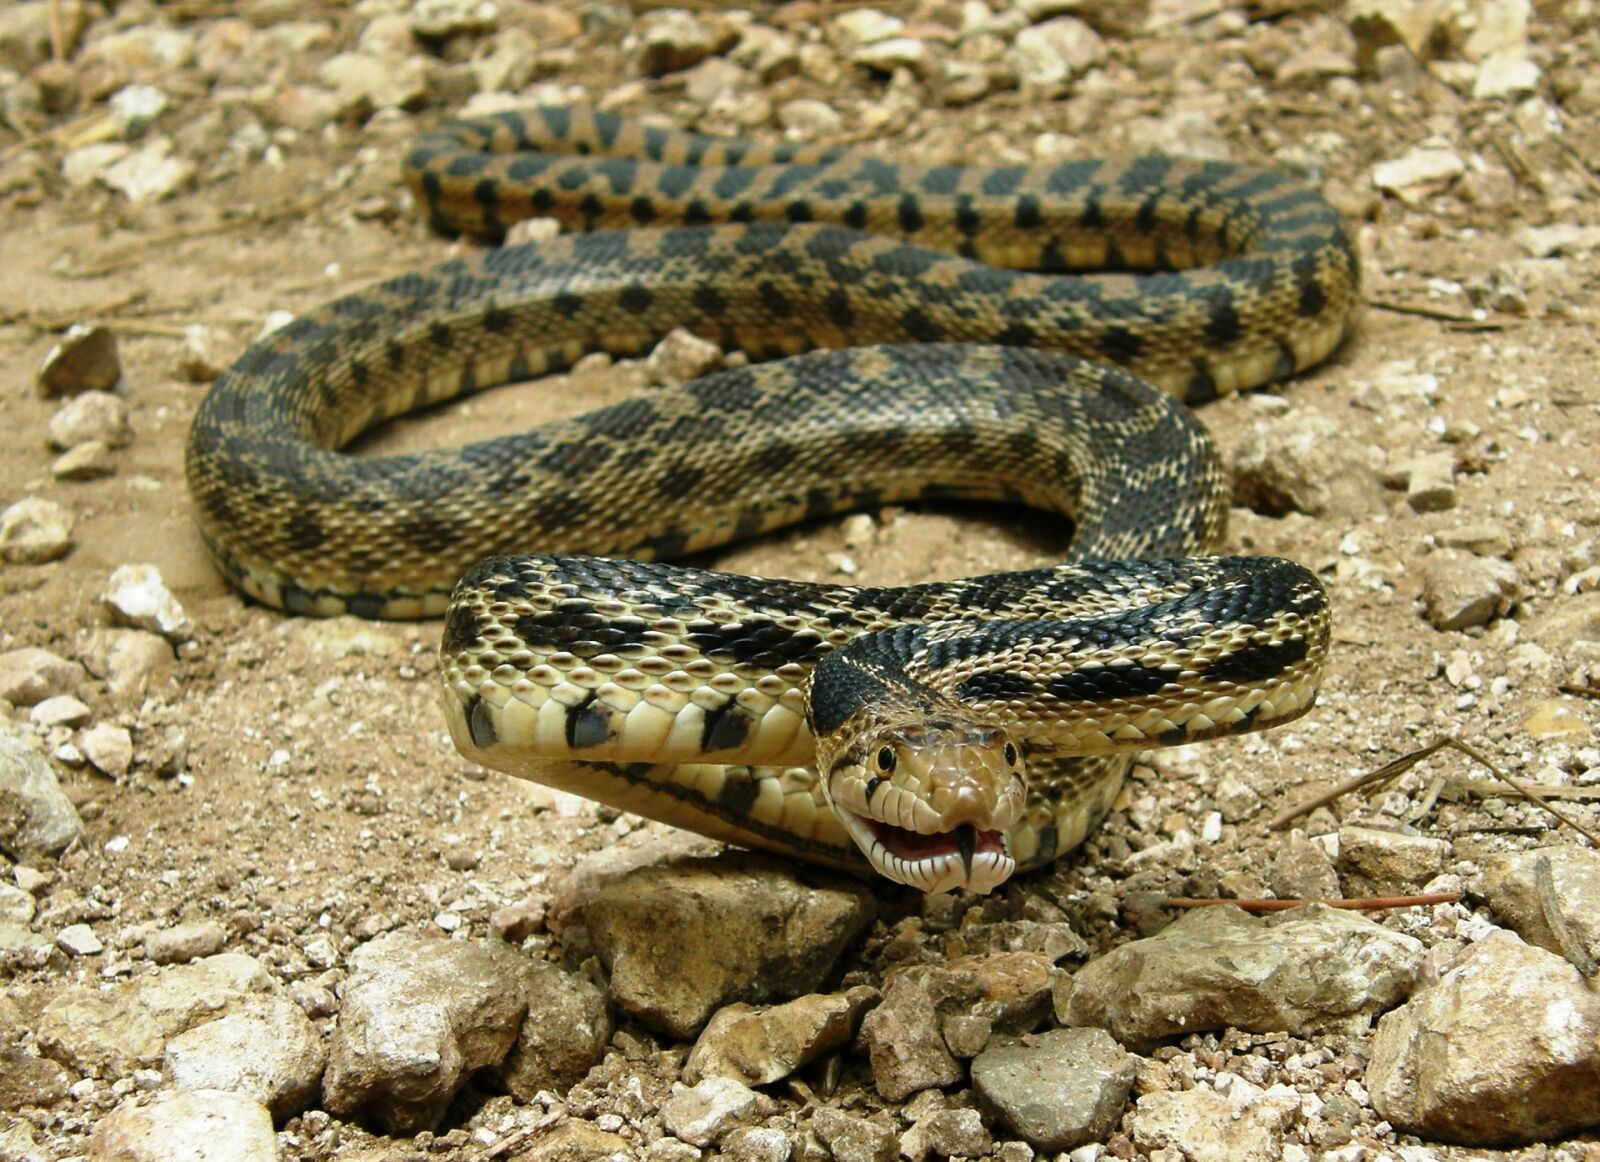 Olympus SP560UZ sample photo. Gopher snake, coiled, reptile photography